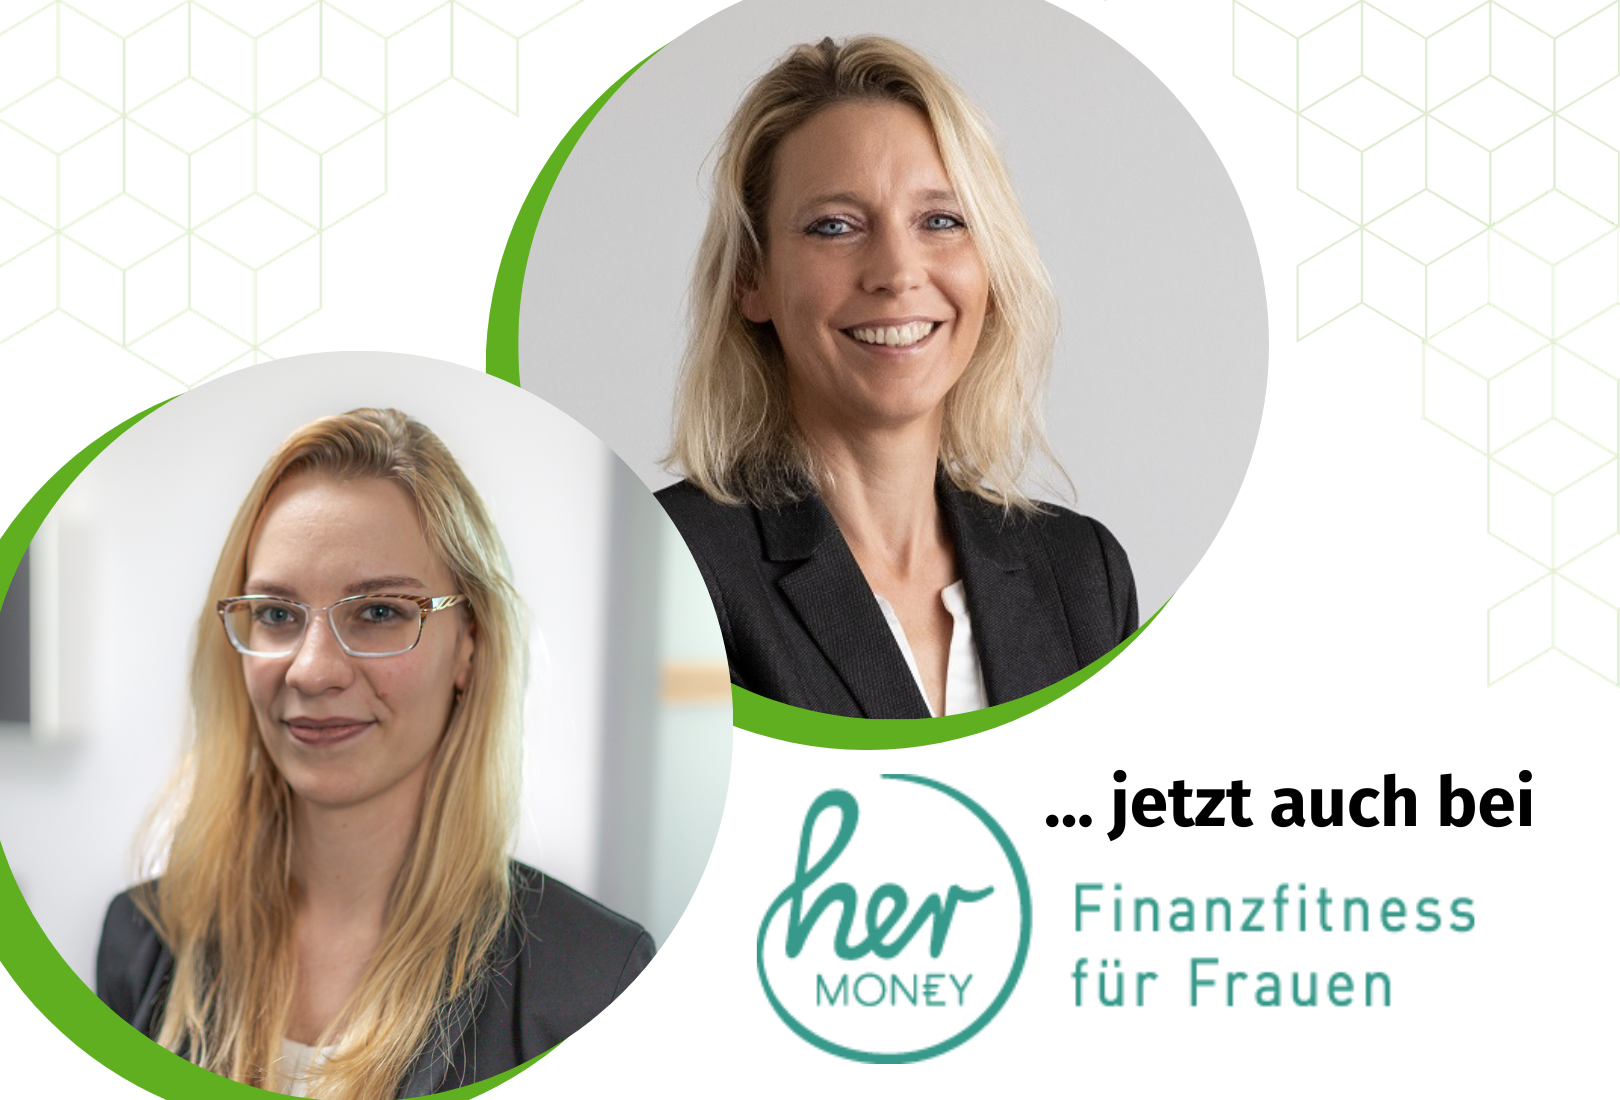 revaluate AG jetzt auch bei hermoney!